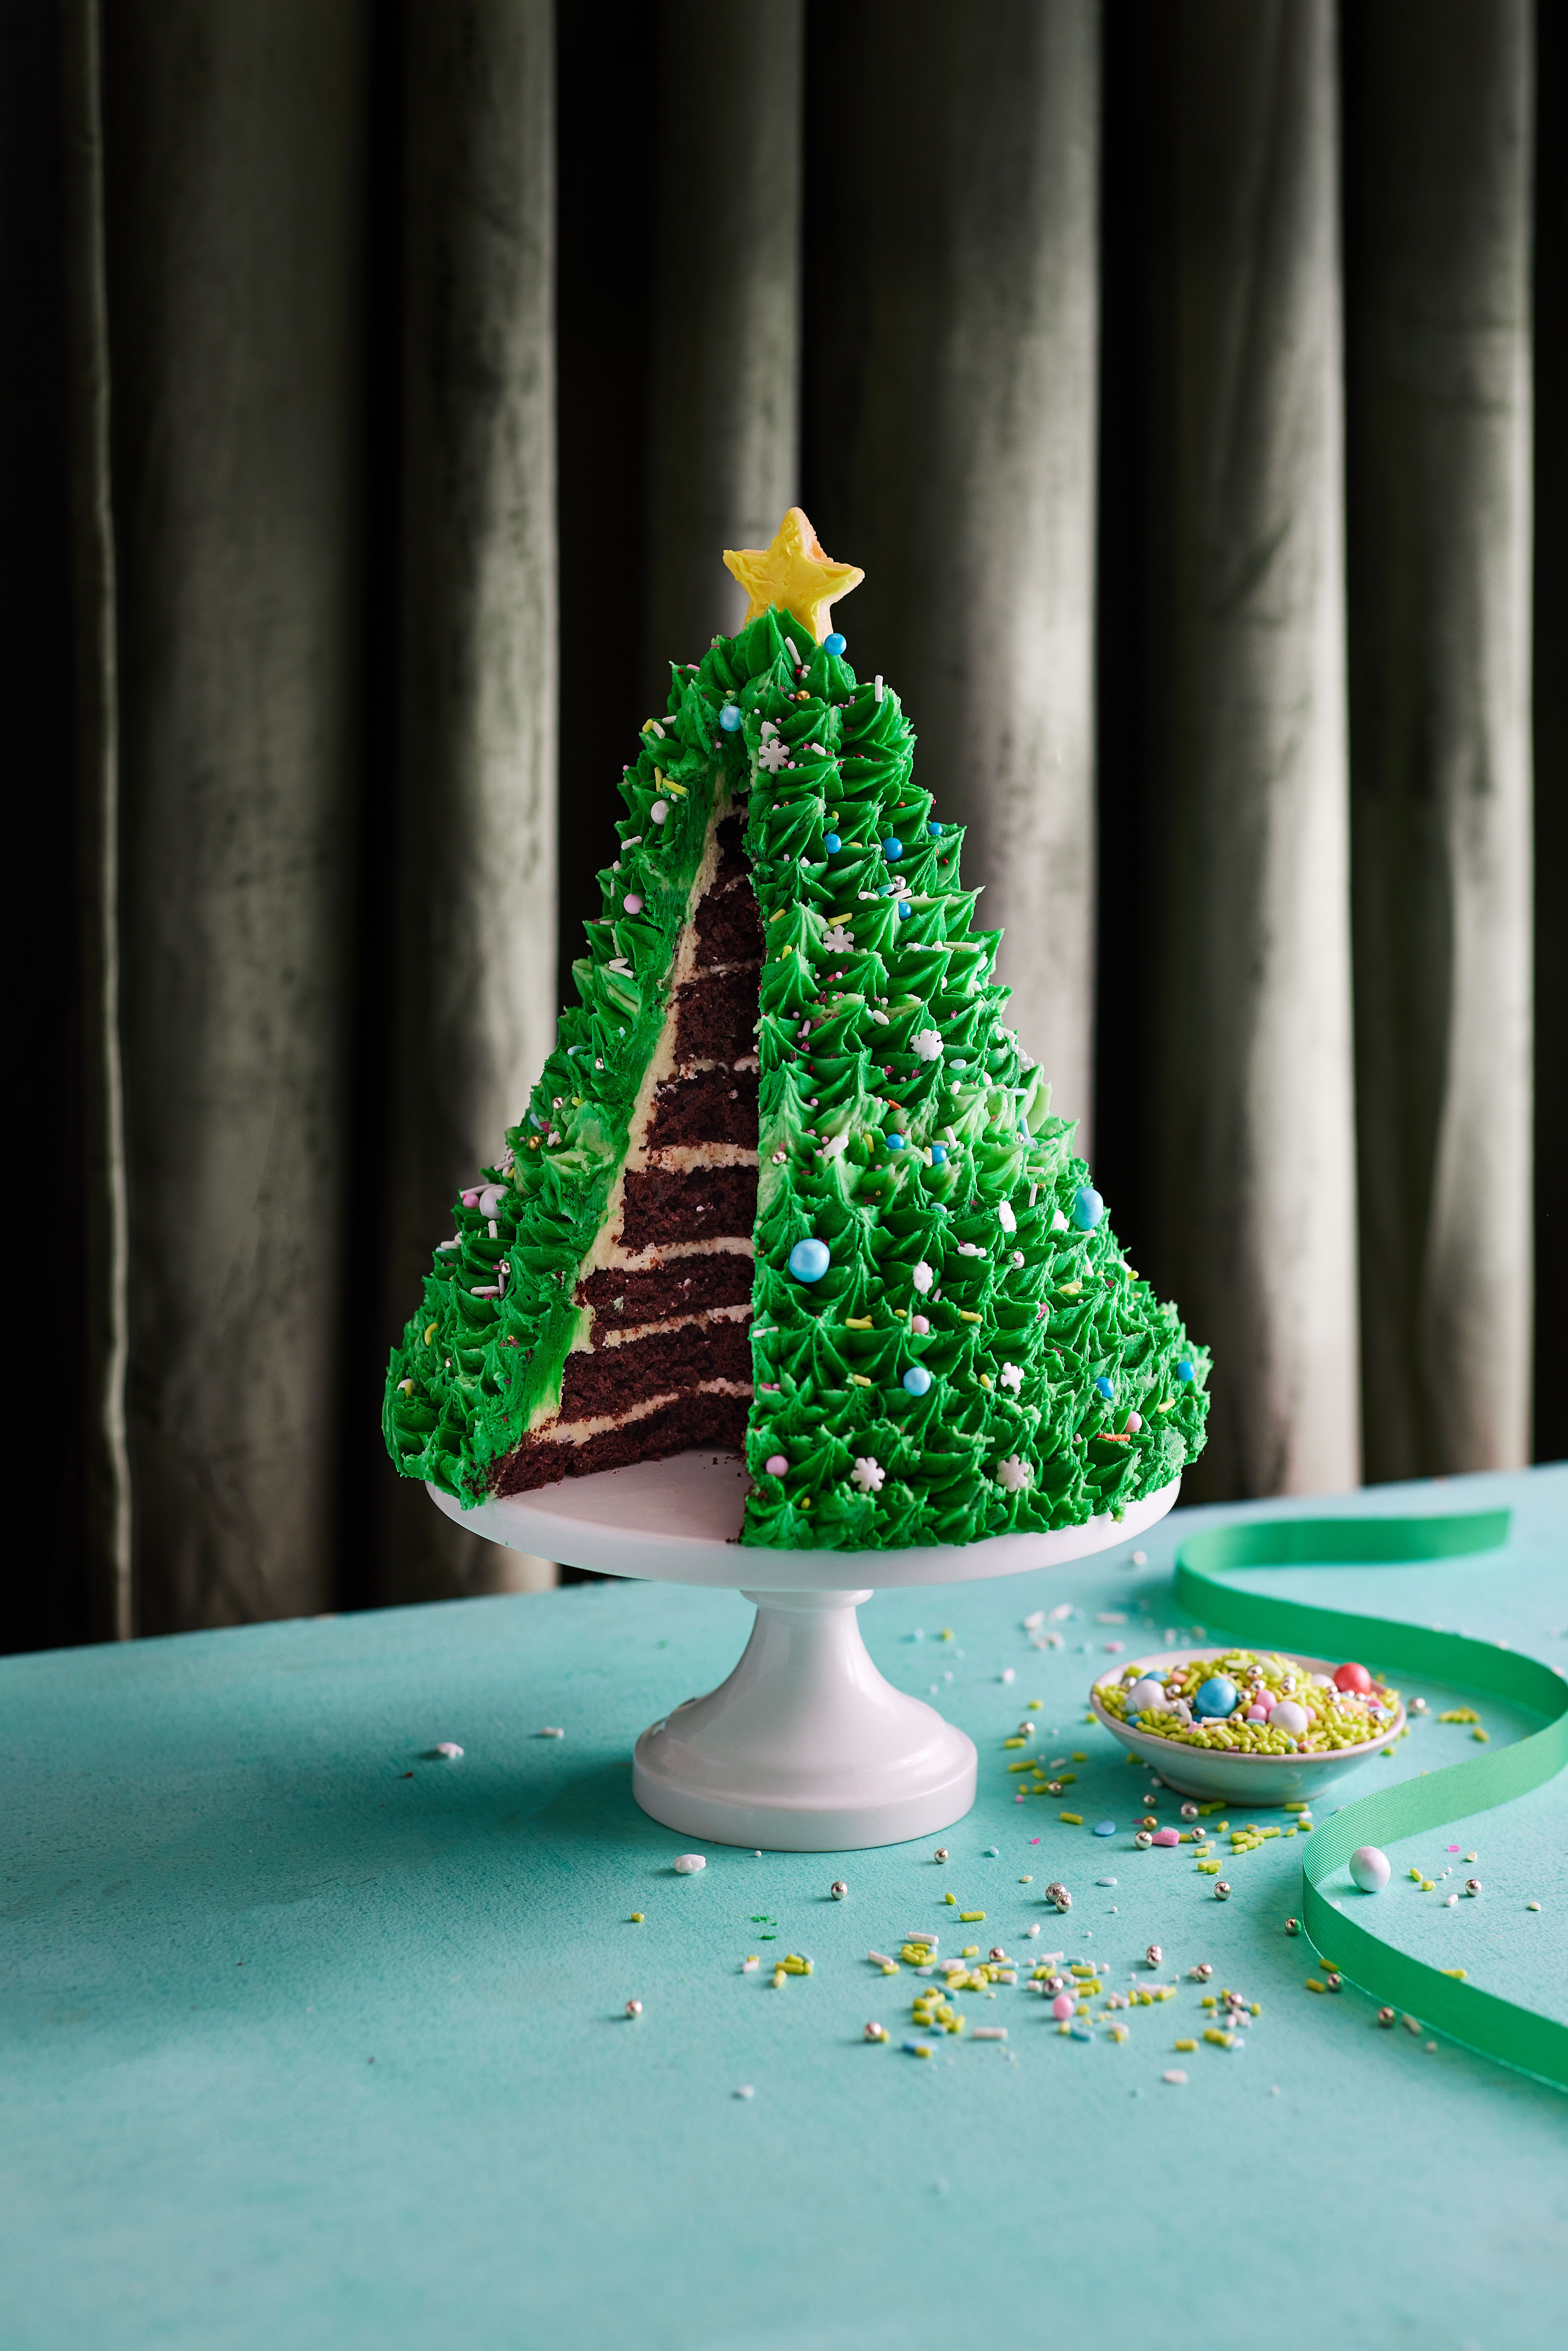 42 Cheerful Christmas Cake Ideas  Our Baking Blog Cake Cookie  Dessert  Recipes by Wilton